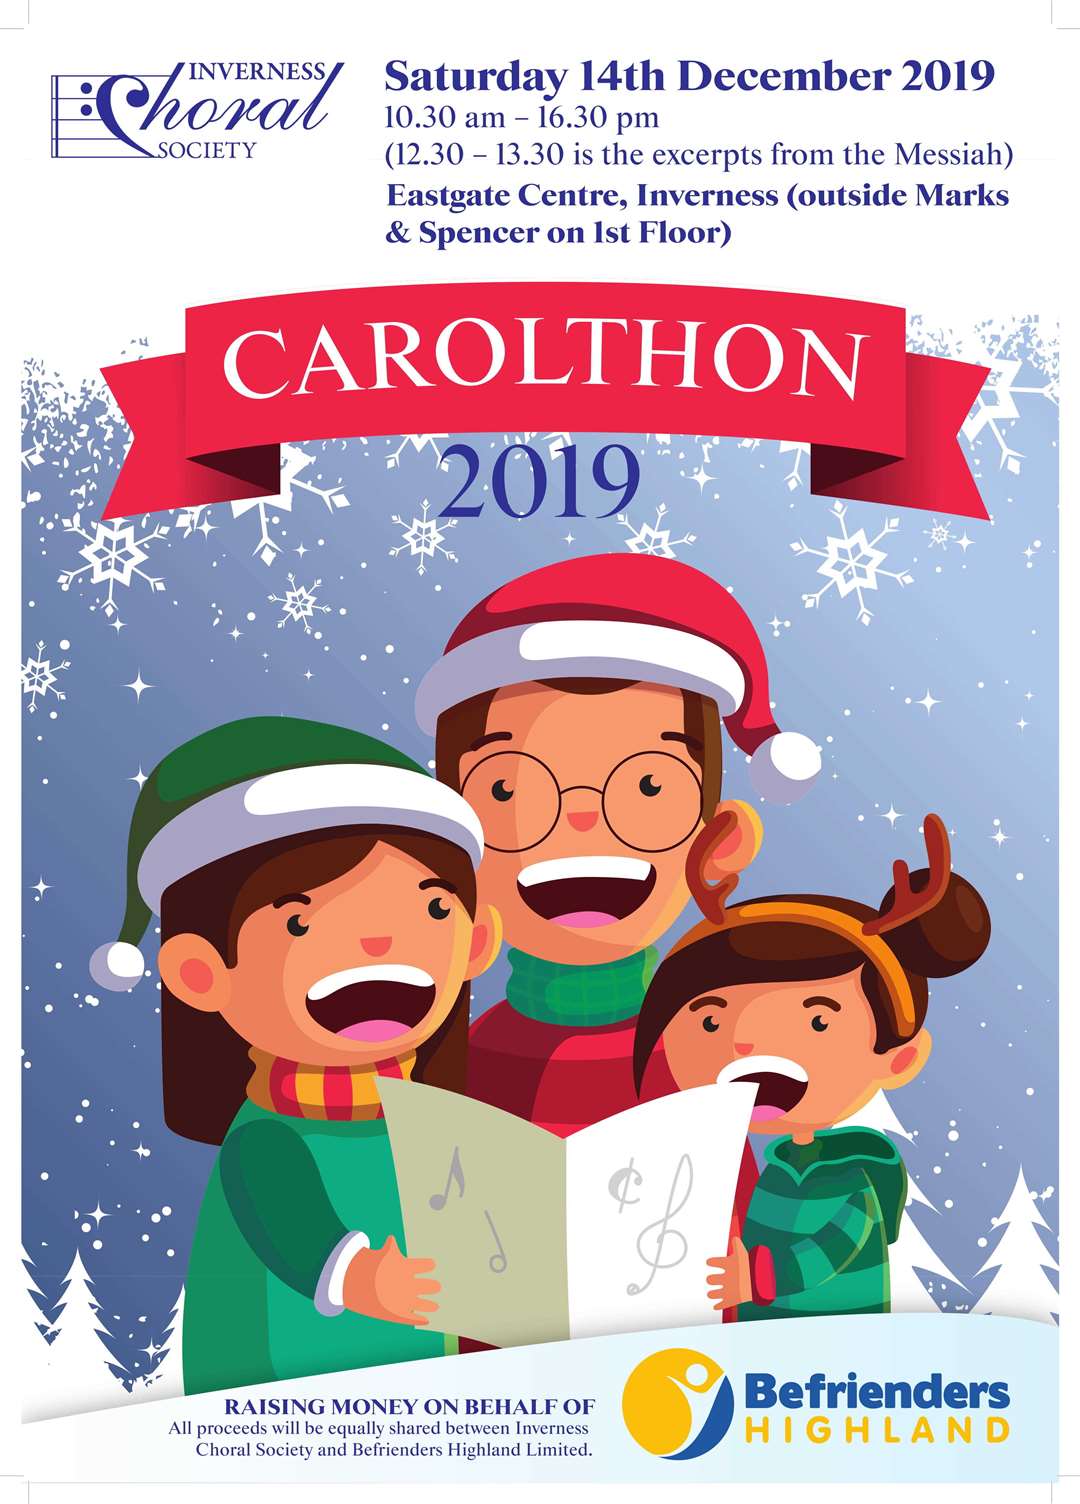 Inverness Choral Society's Carolthon returns to the Eastgate Centre for 2019.